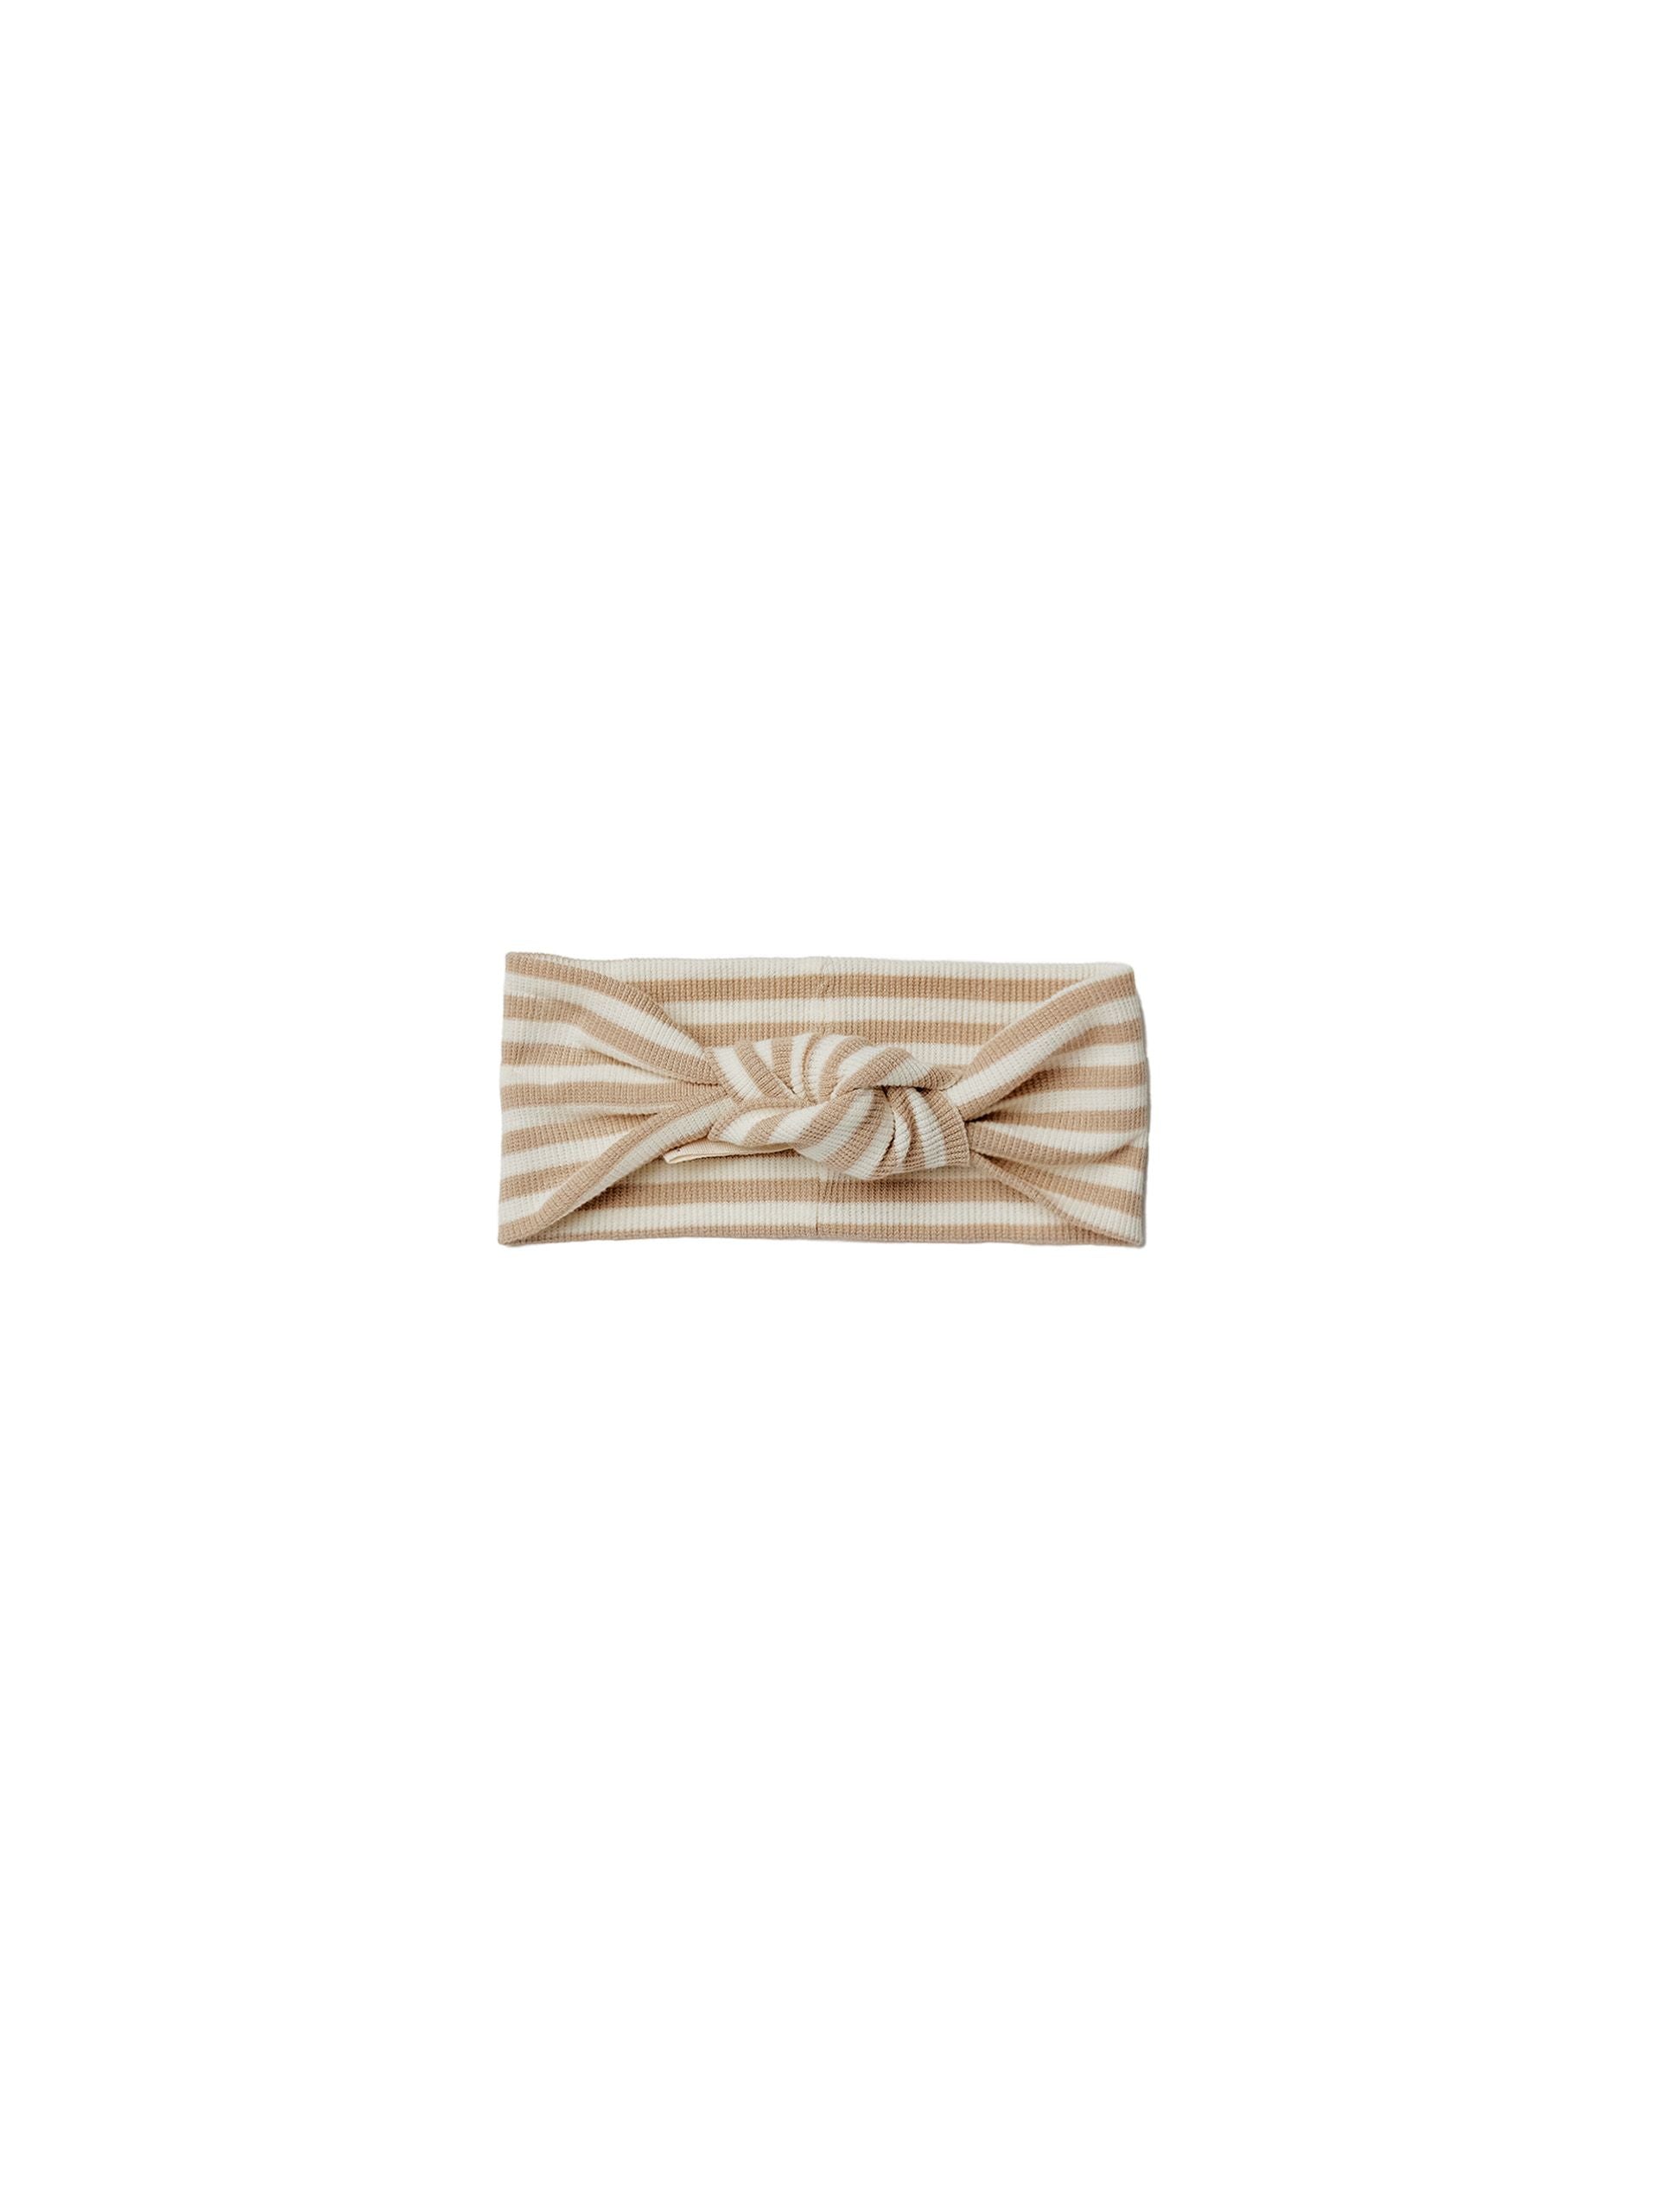 Quincy Mae Ribbed Knotted Headband | Latte Stripe